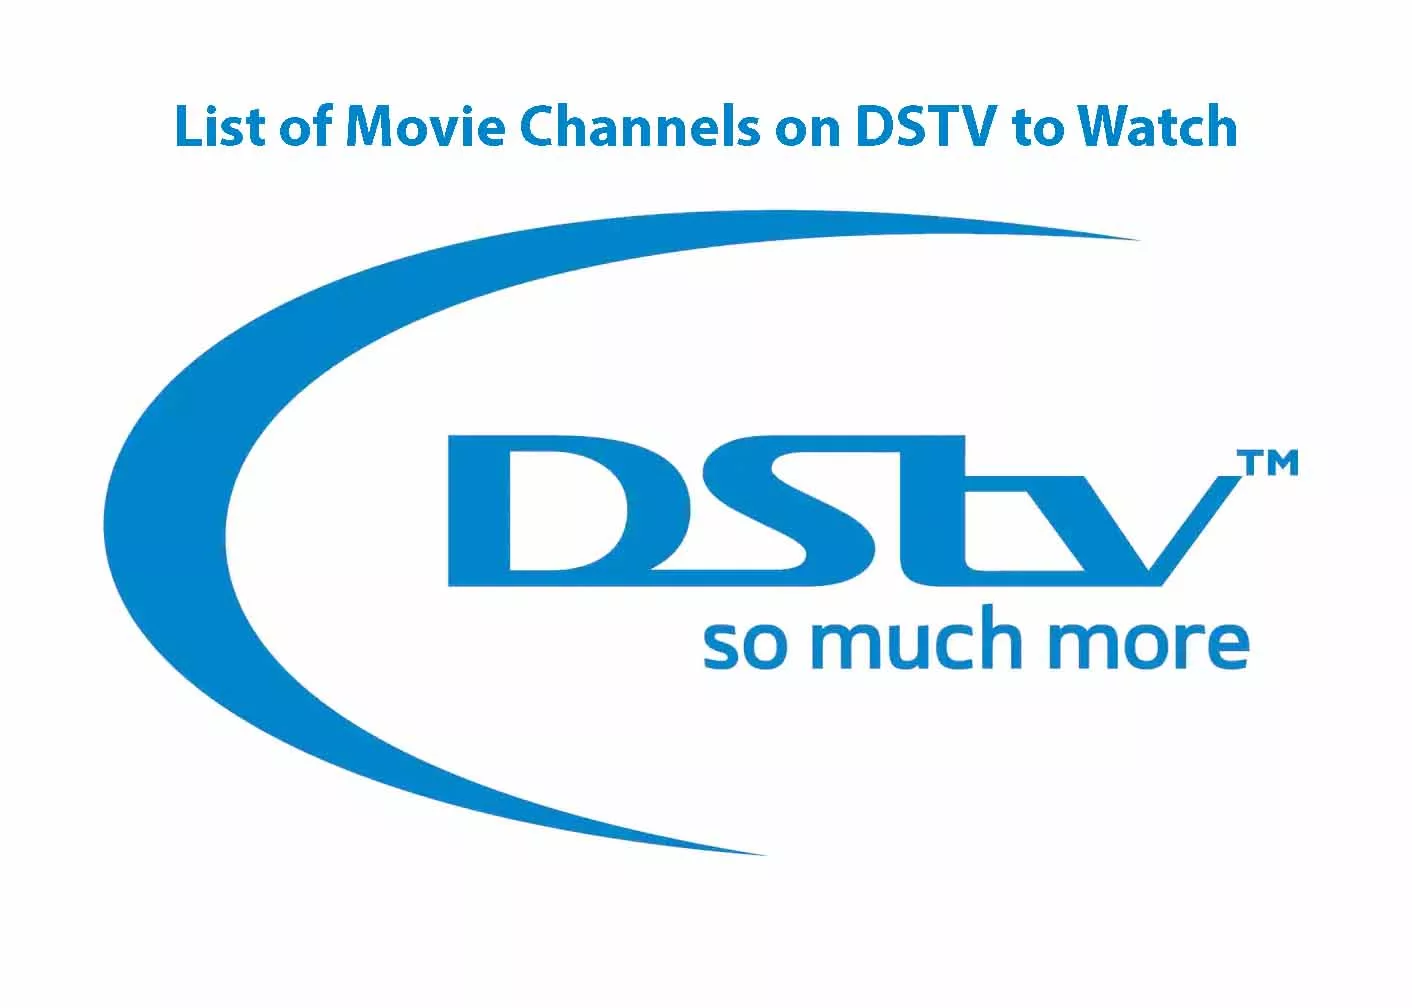 List of Movie Channels on DSTV to Watch